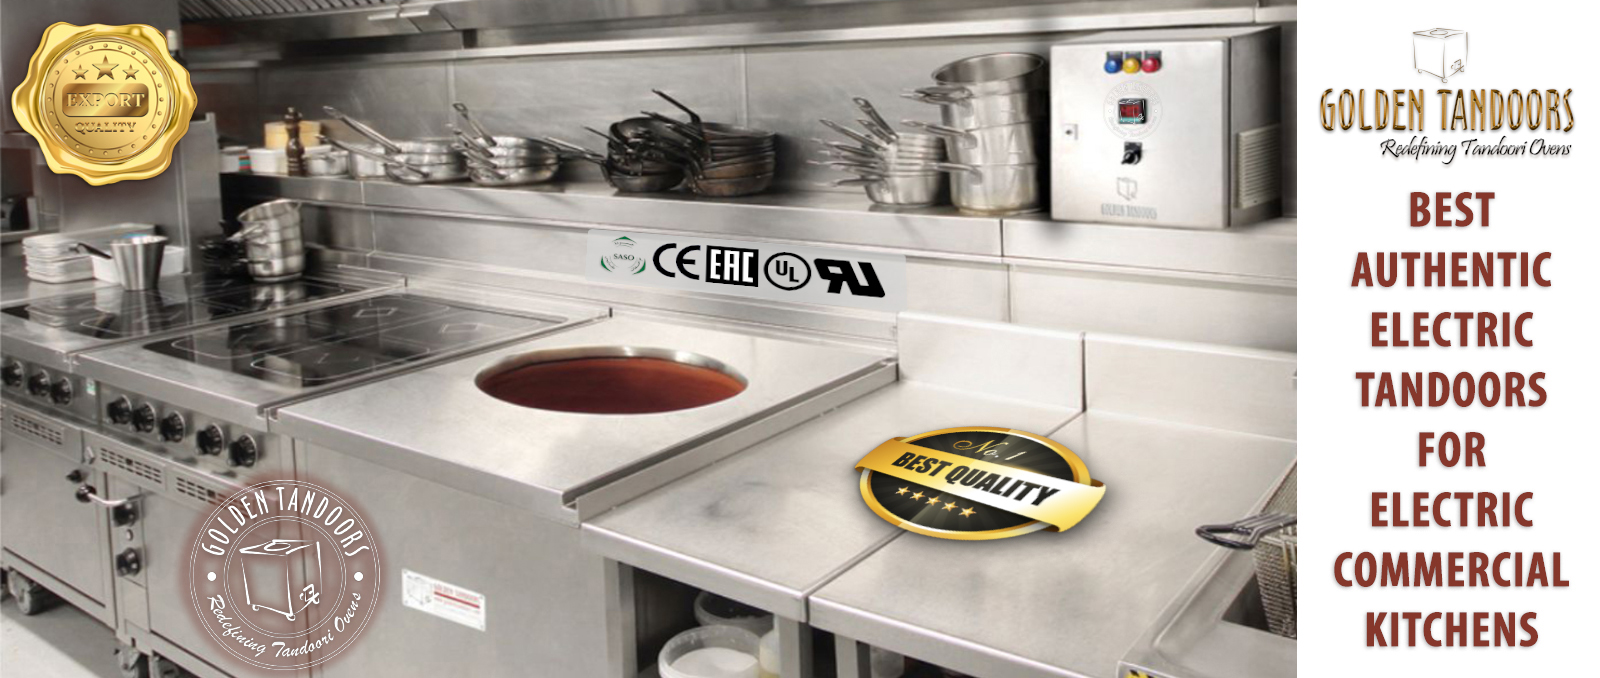 Electric Tandoors commercial kitchens